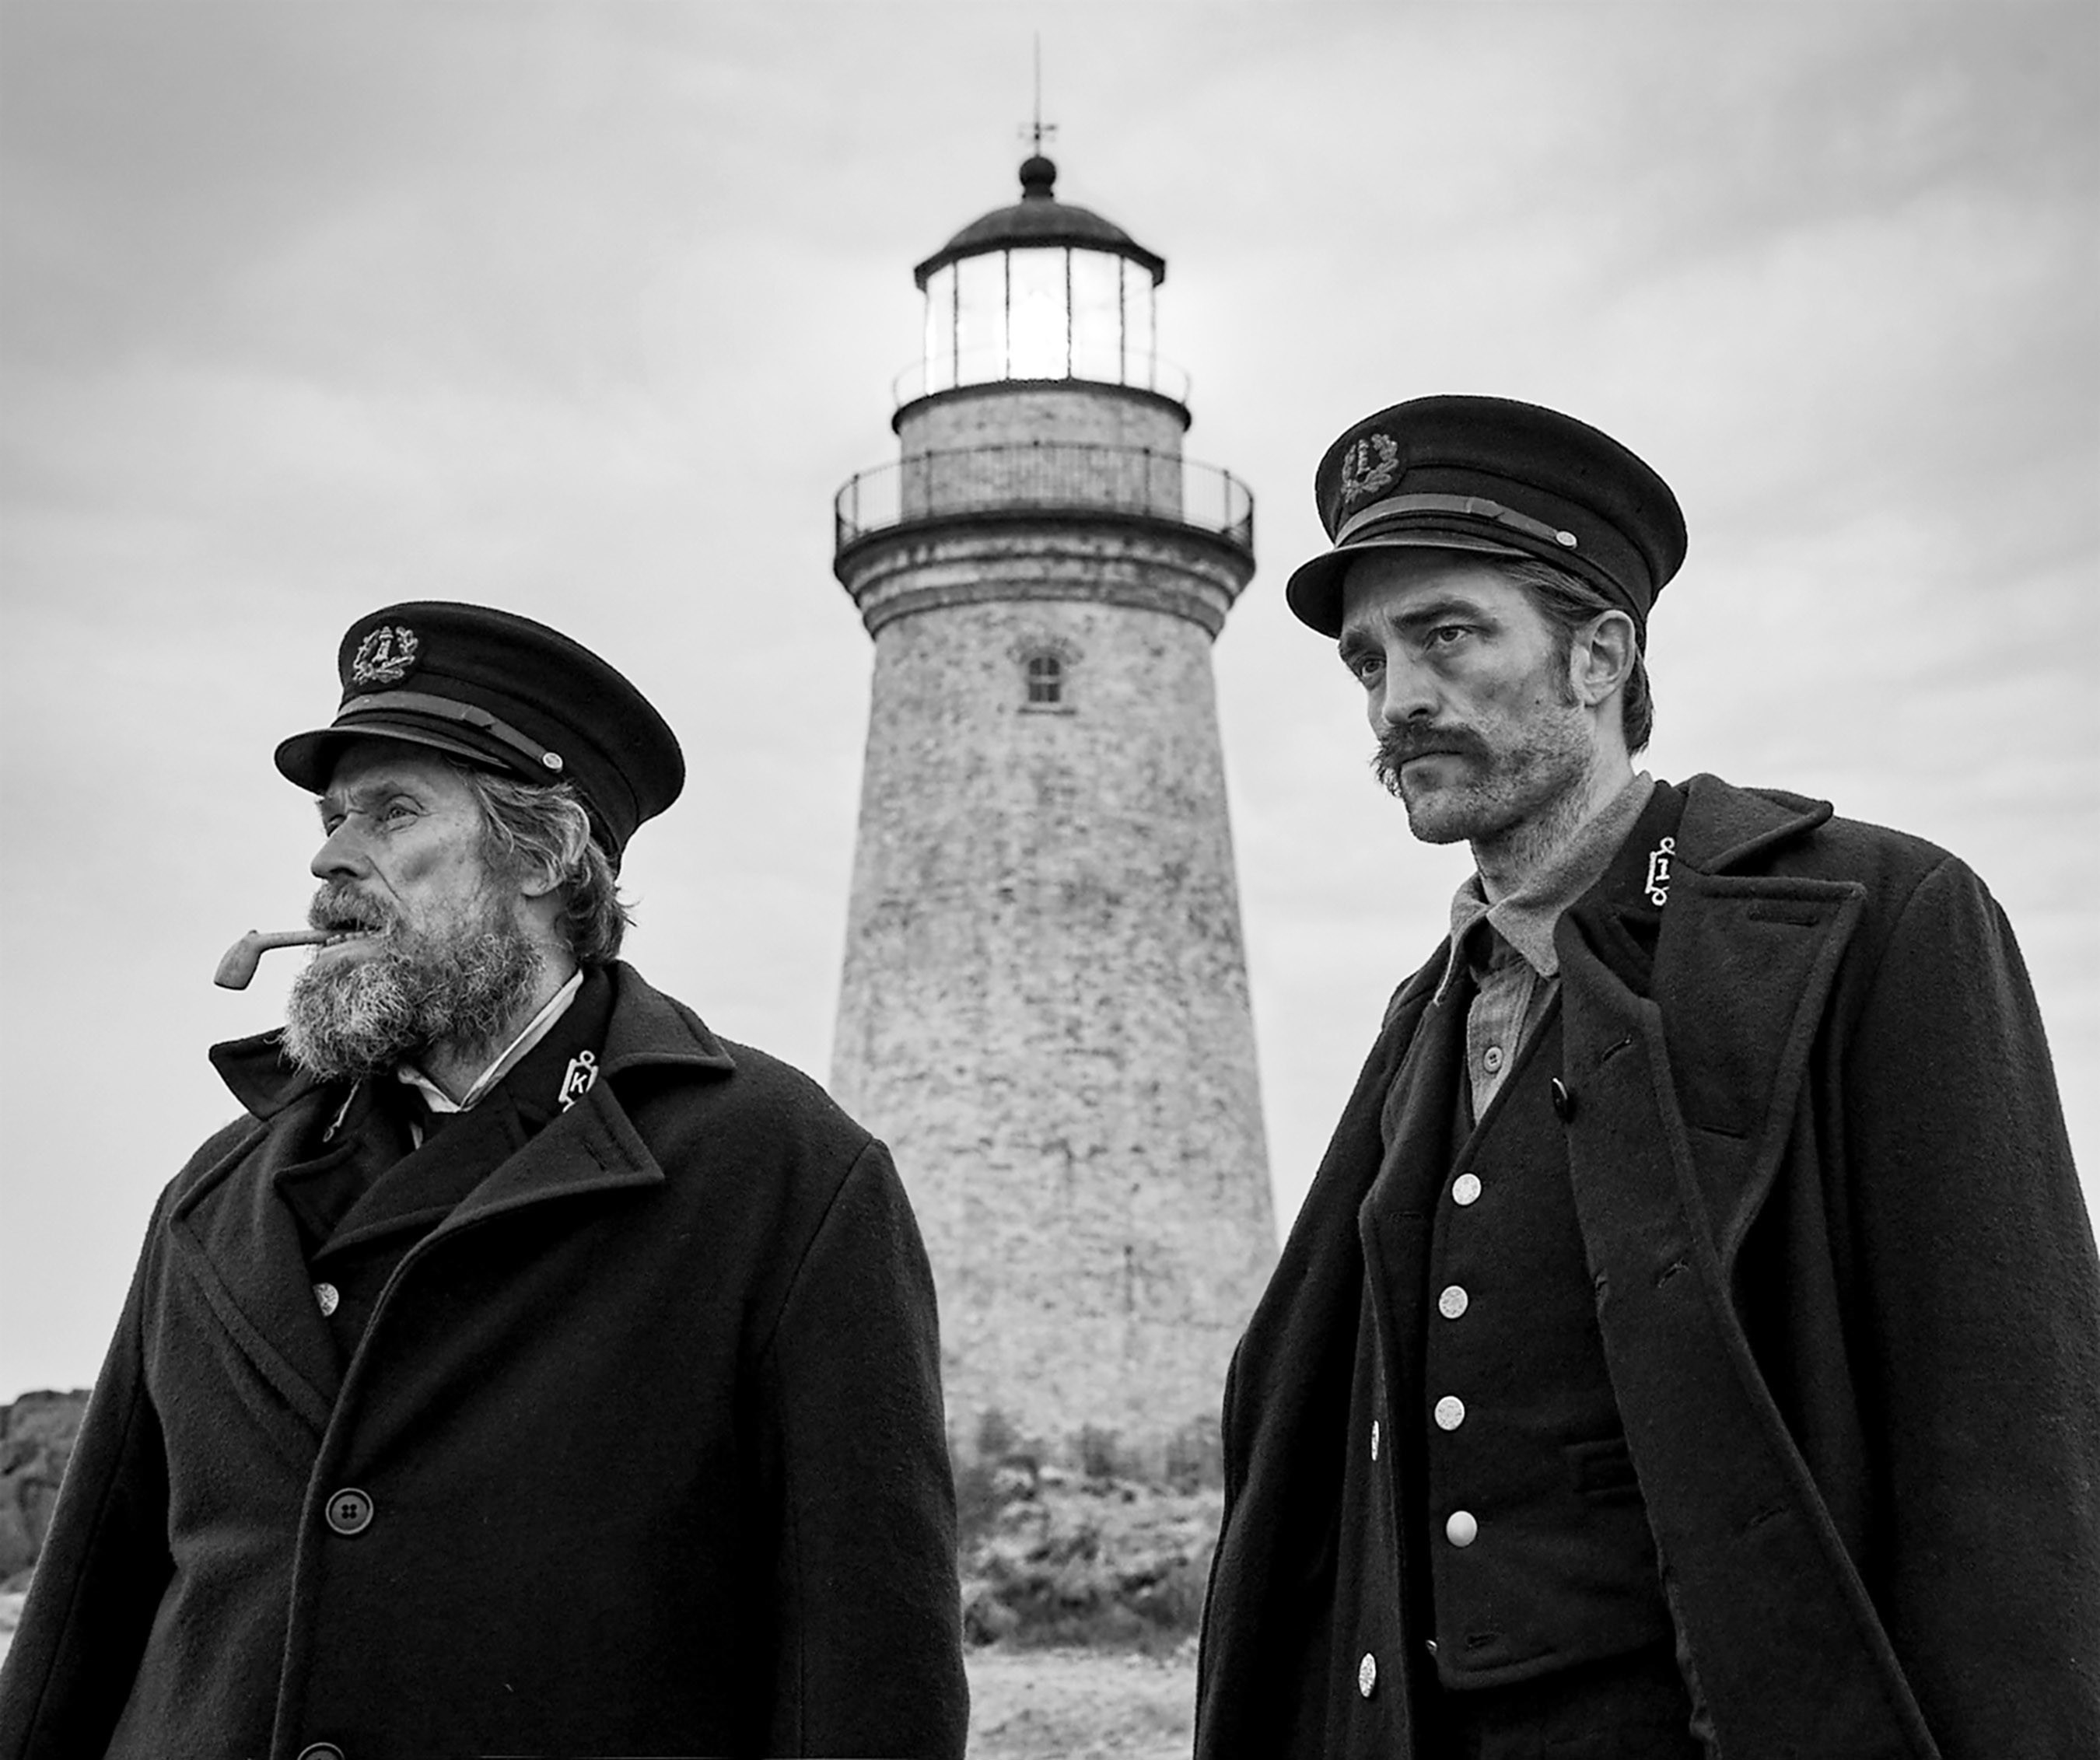 Willem Dafoe and Robert Pattionson stand in front of a lighthouse